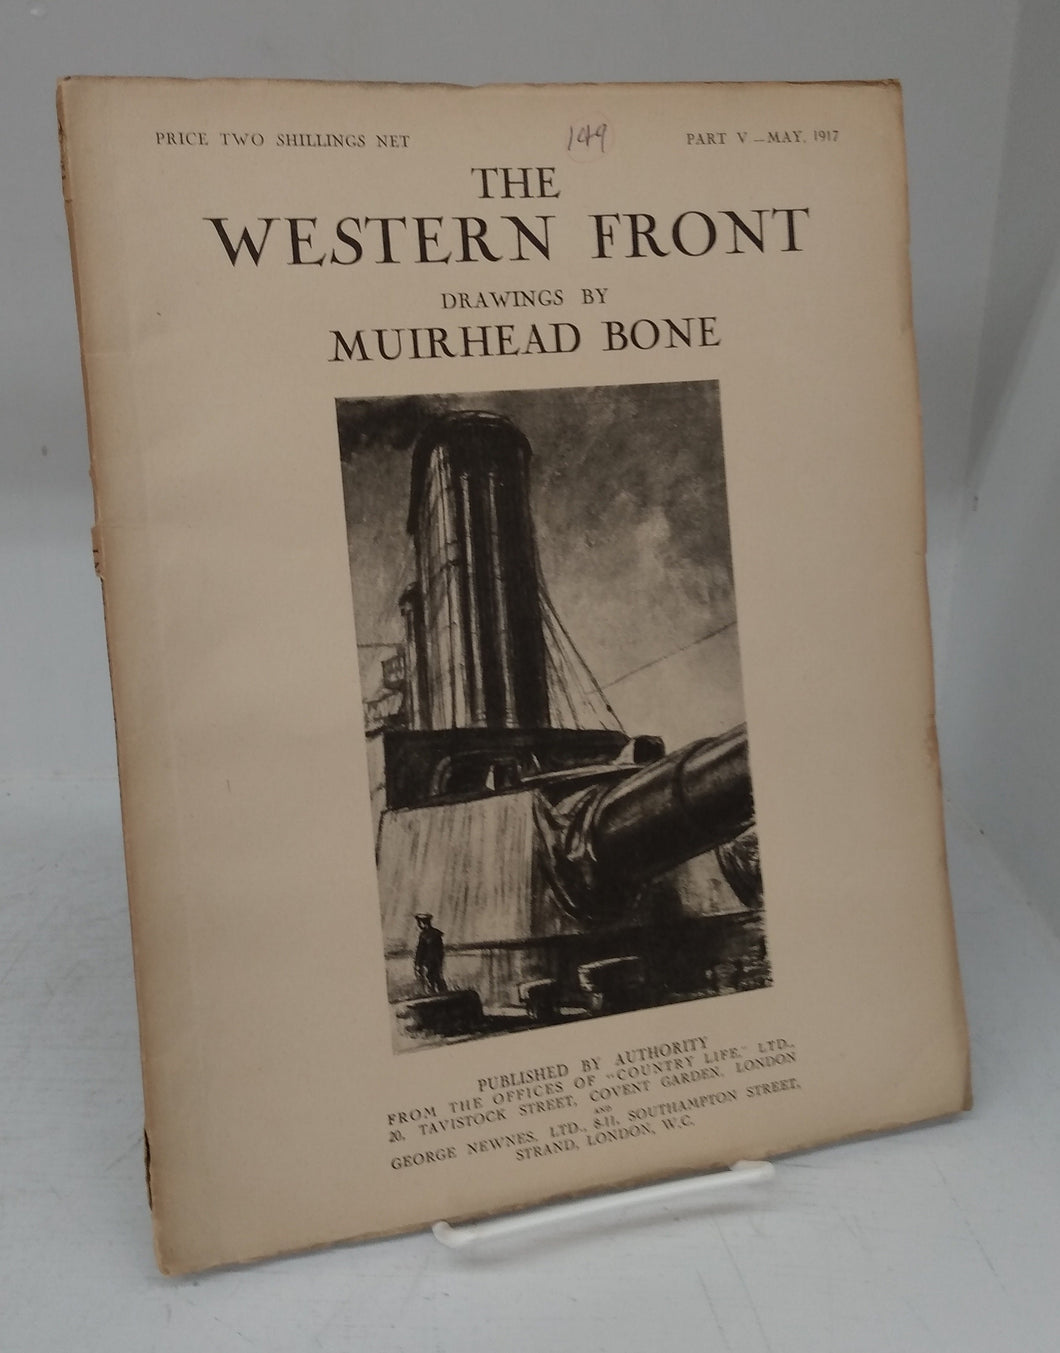 The Western Front: Drawings by Muirhead Bone, Part V - May 1917